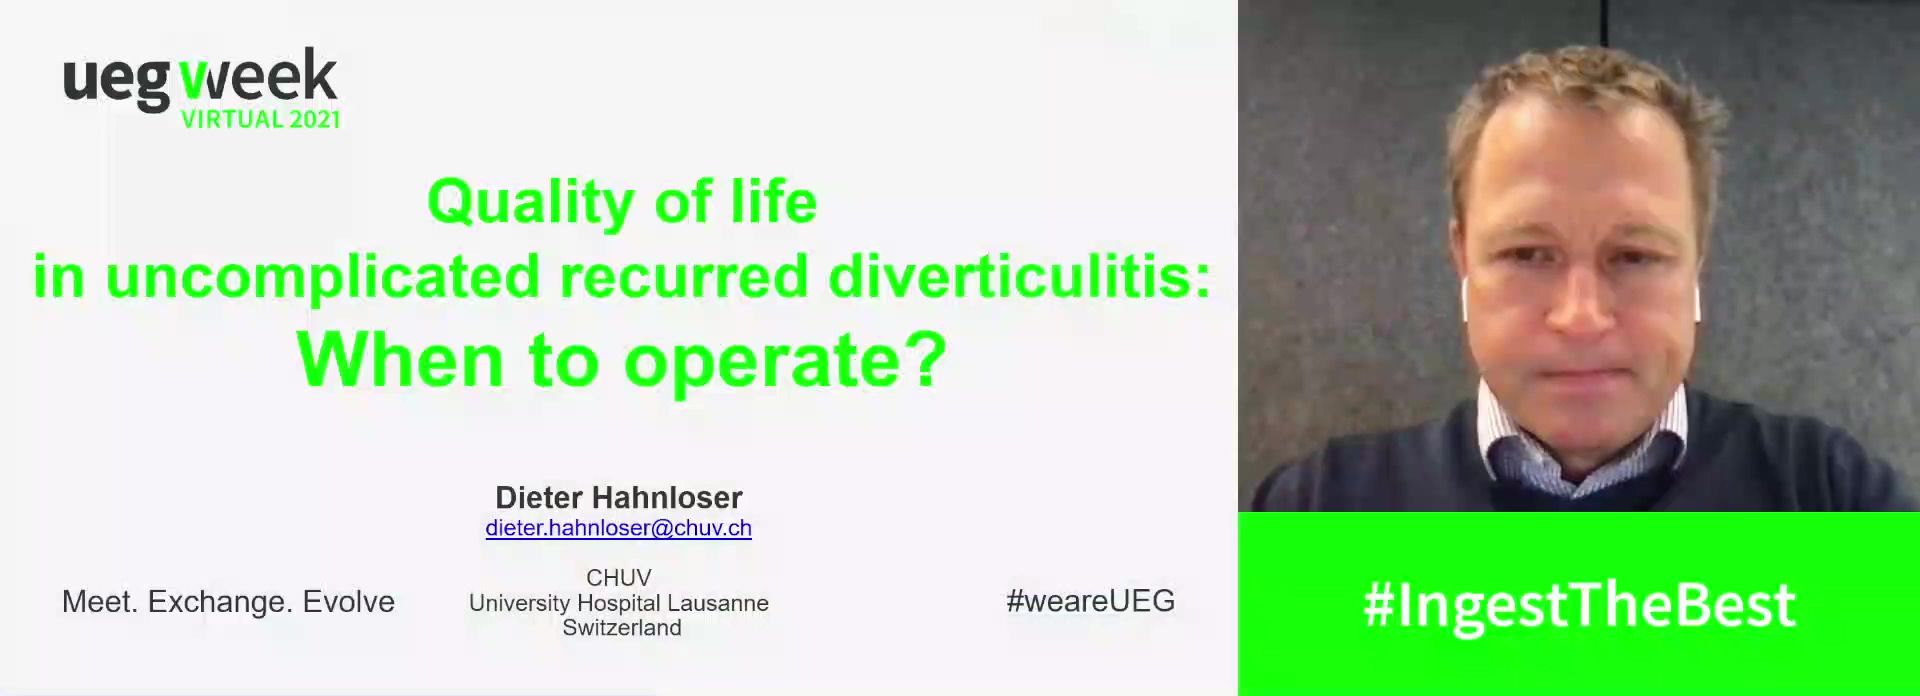 Quality of life in uncomplicated recurred diverticulitis: When to operate?